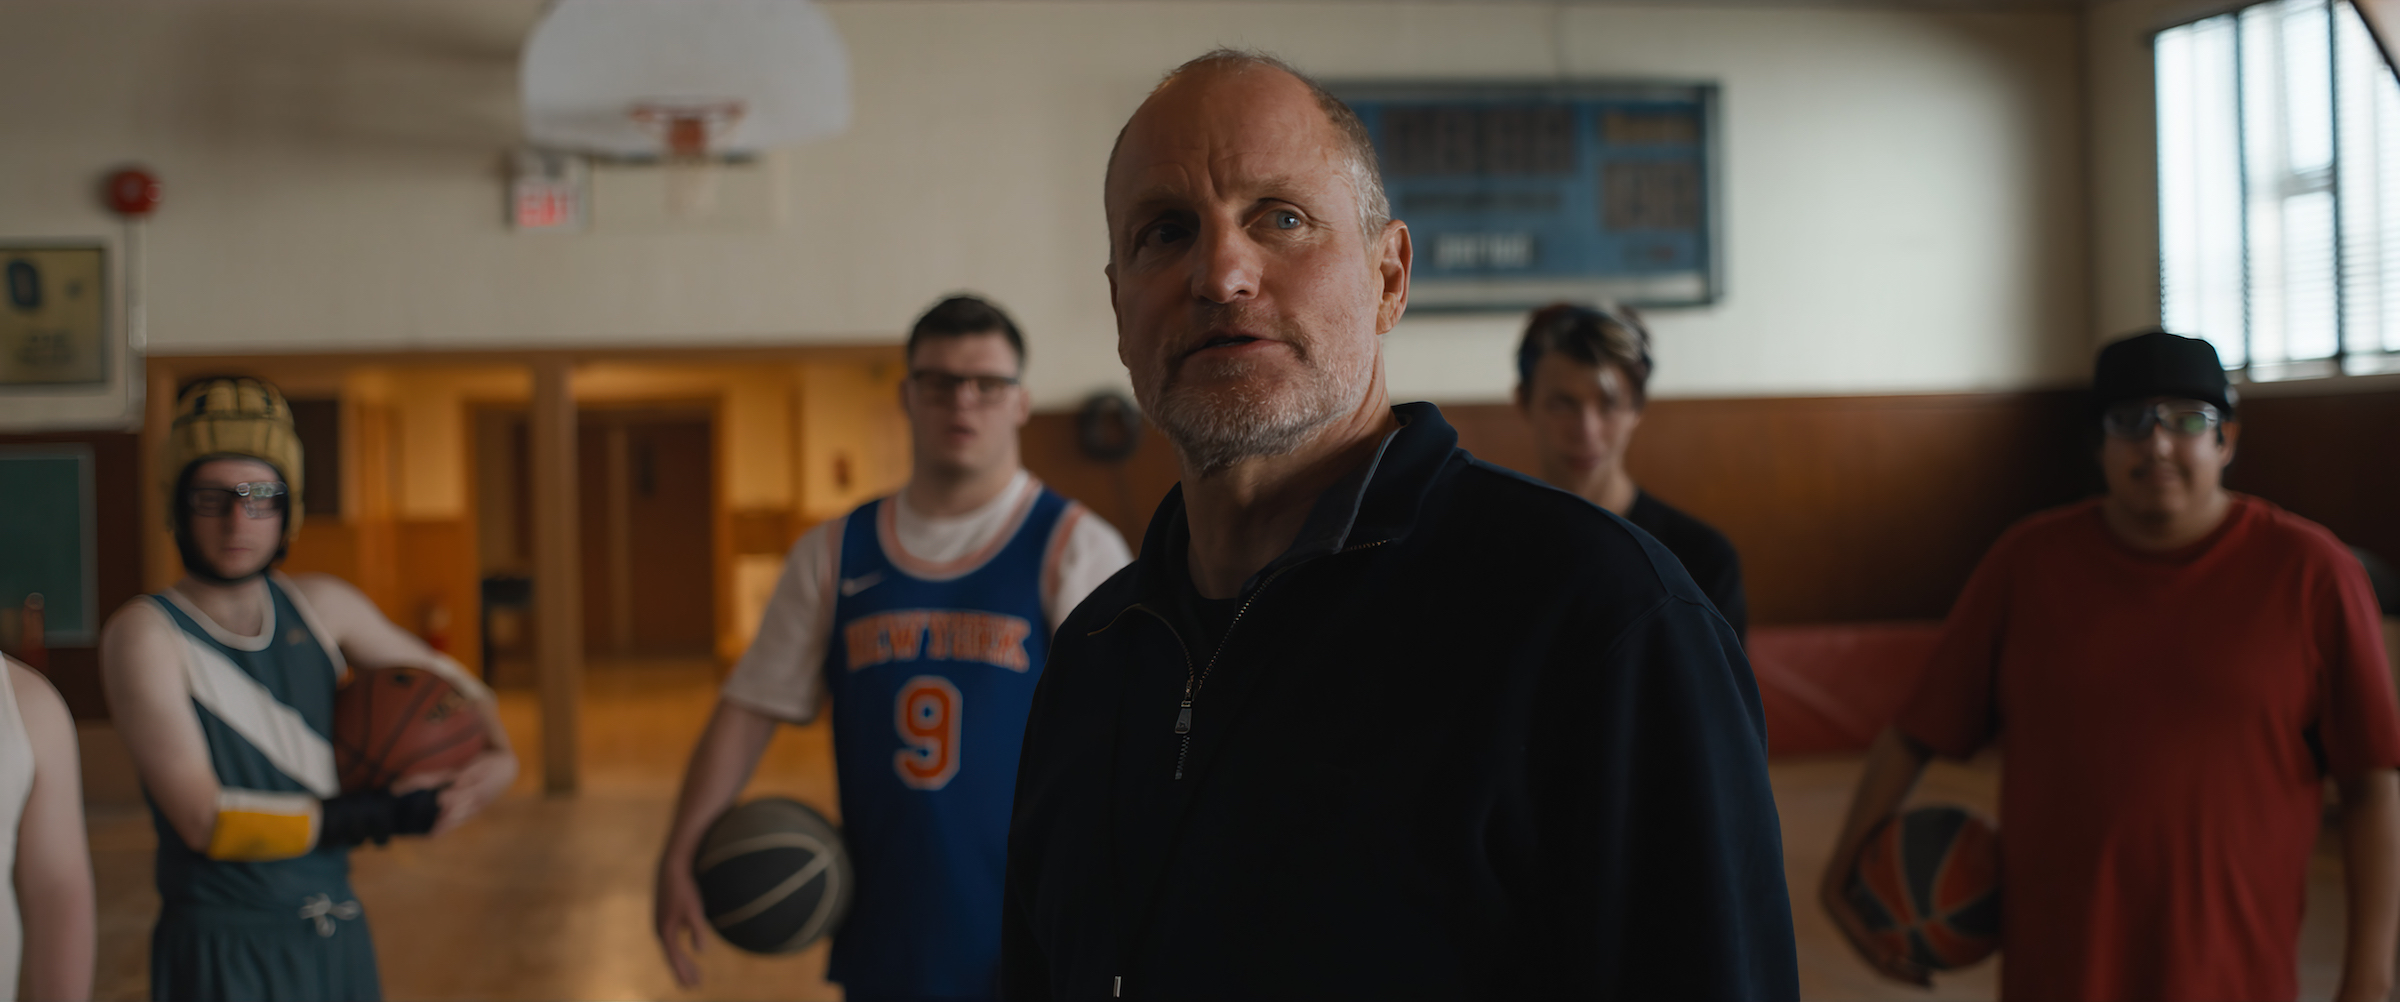 Casey Metcalfe as Marlon, James Day Keith as Benny, Woody Harrelson as Marcus, Ashton Gunning as Cody, and Tom Sinclair as Blair in 'Champions' (Courtesy of Focus Features)